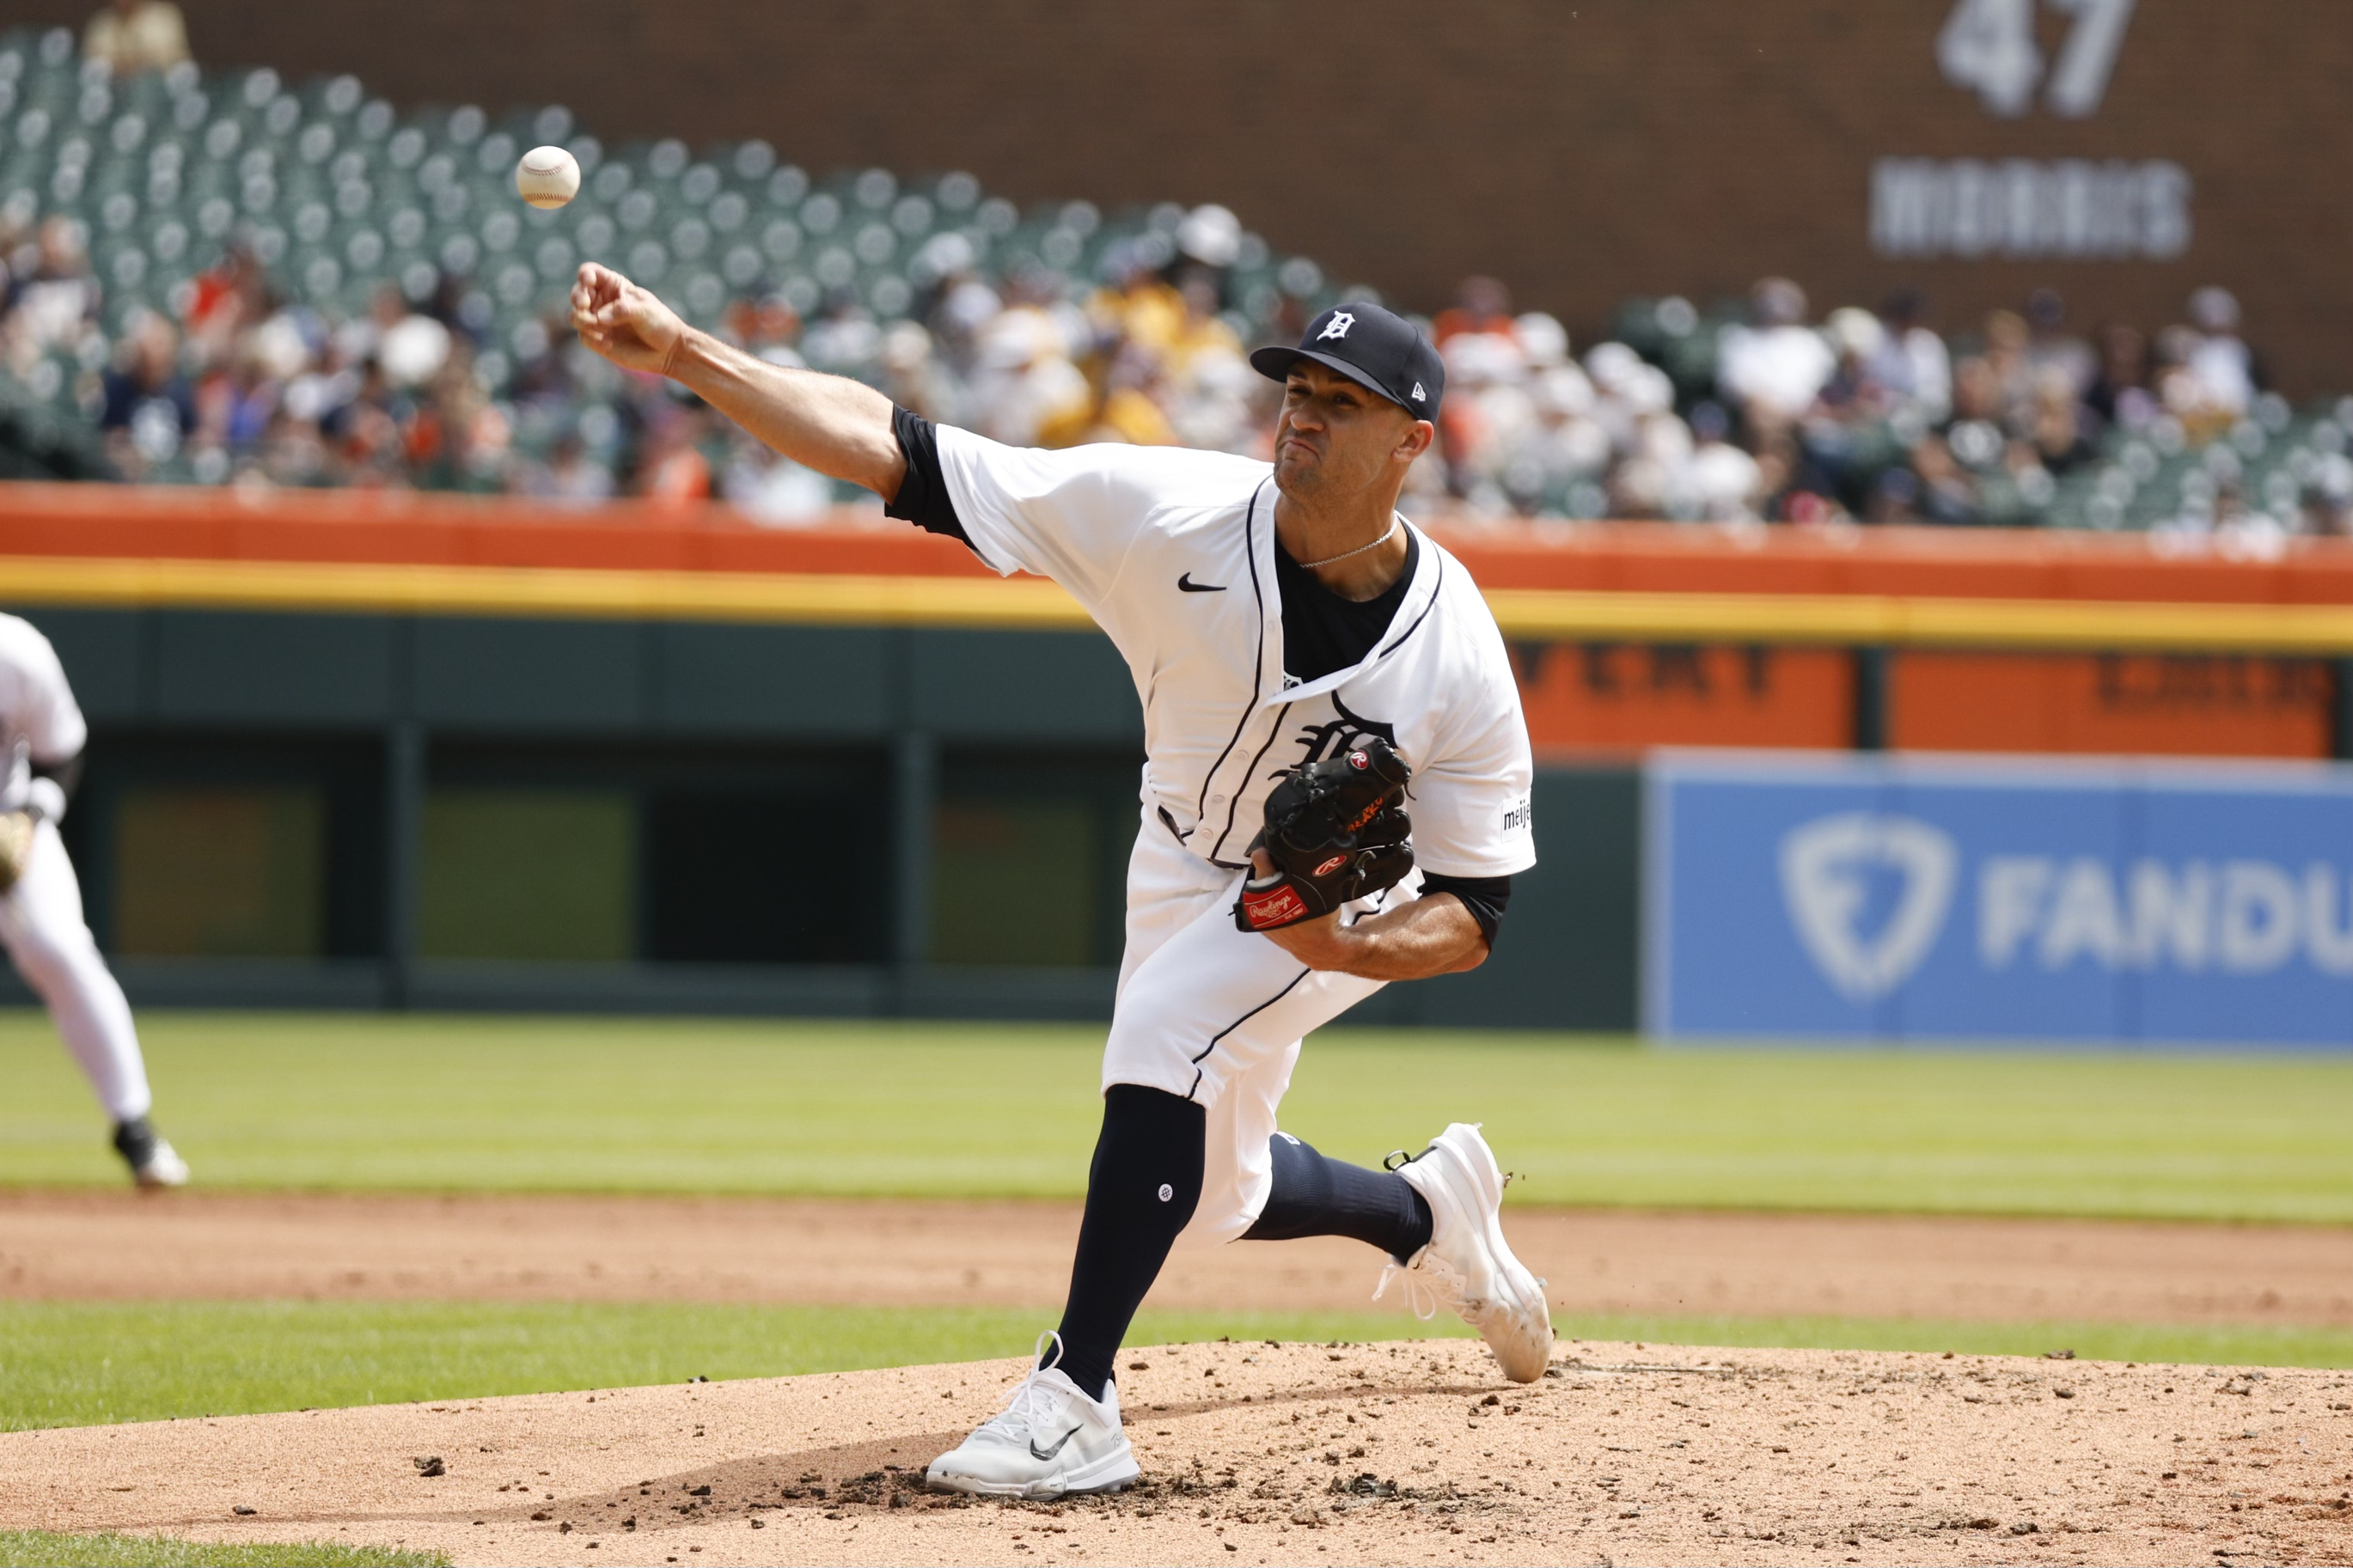 The pitching science behind Jack Flaherty in Detroit so far